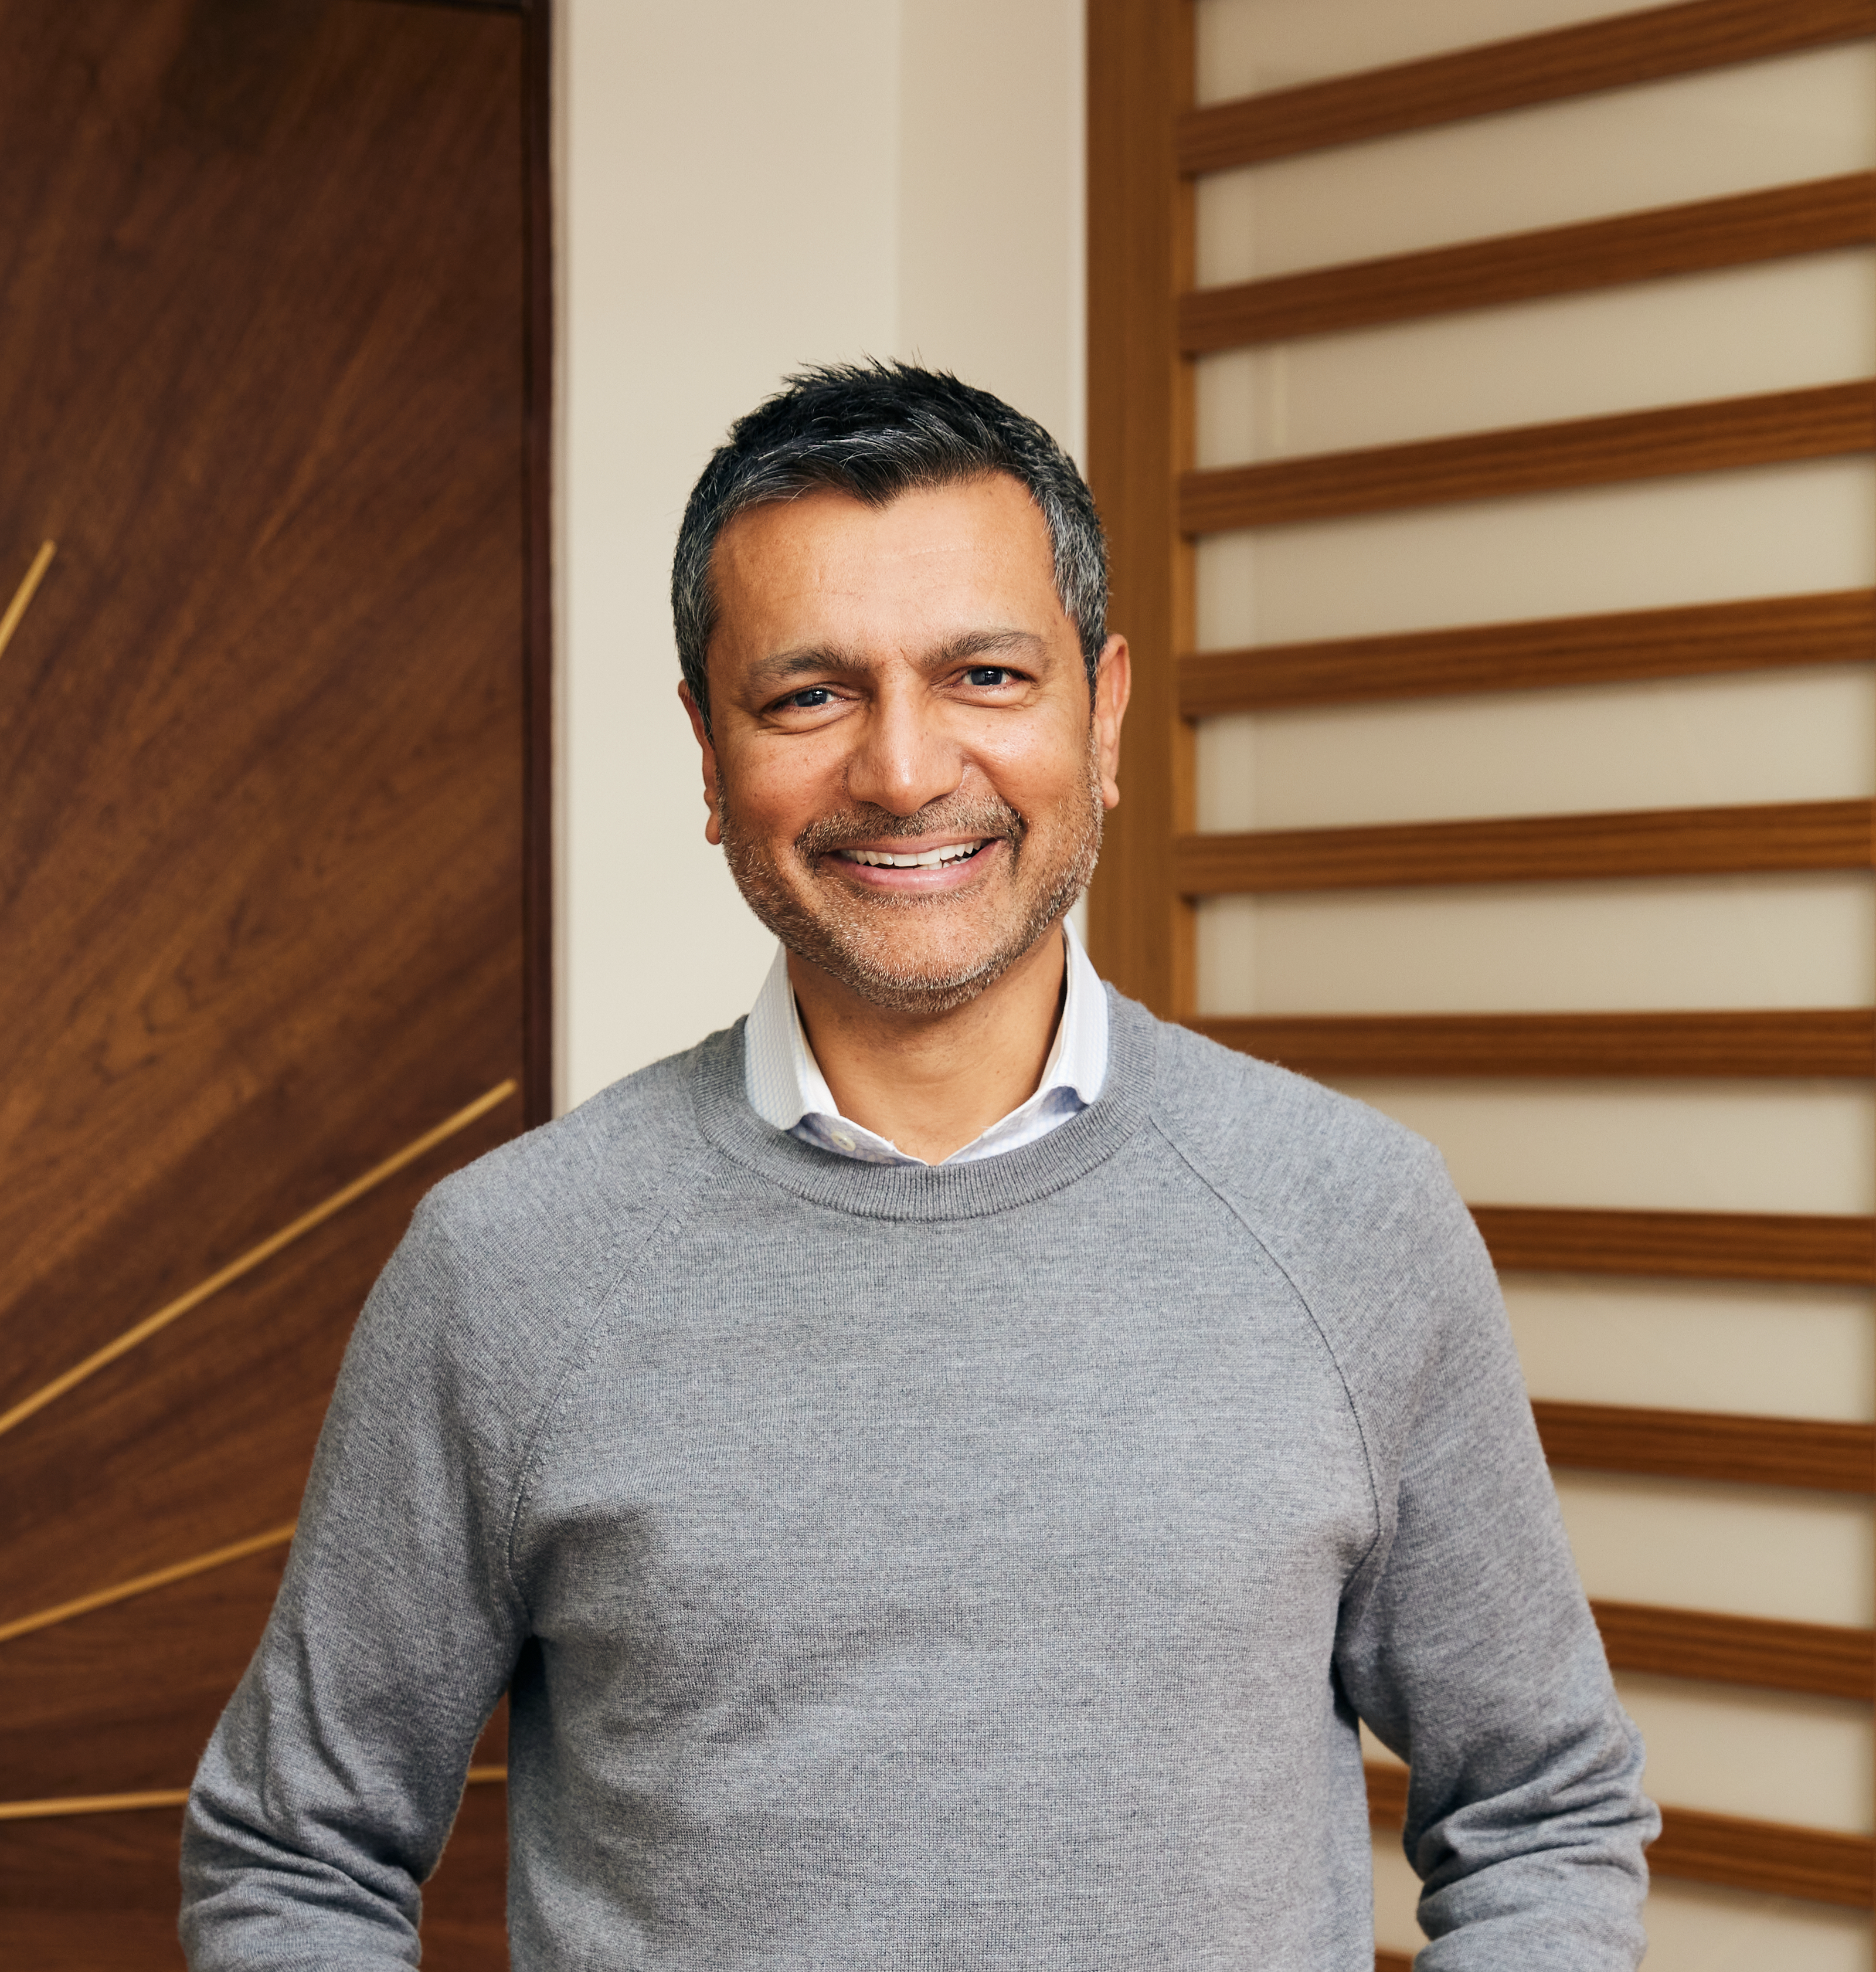 A portrait image of Dharam Rai, VP of Customer Experience at Sonos